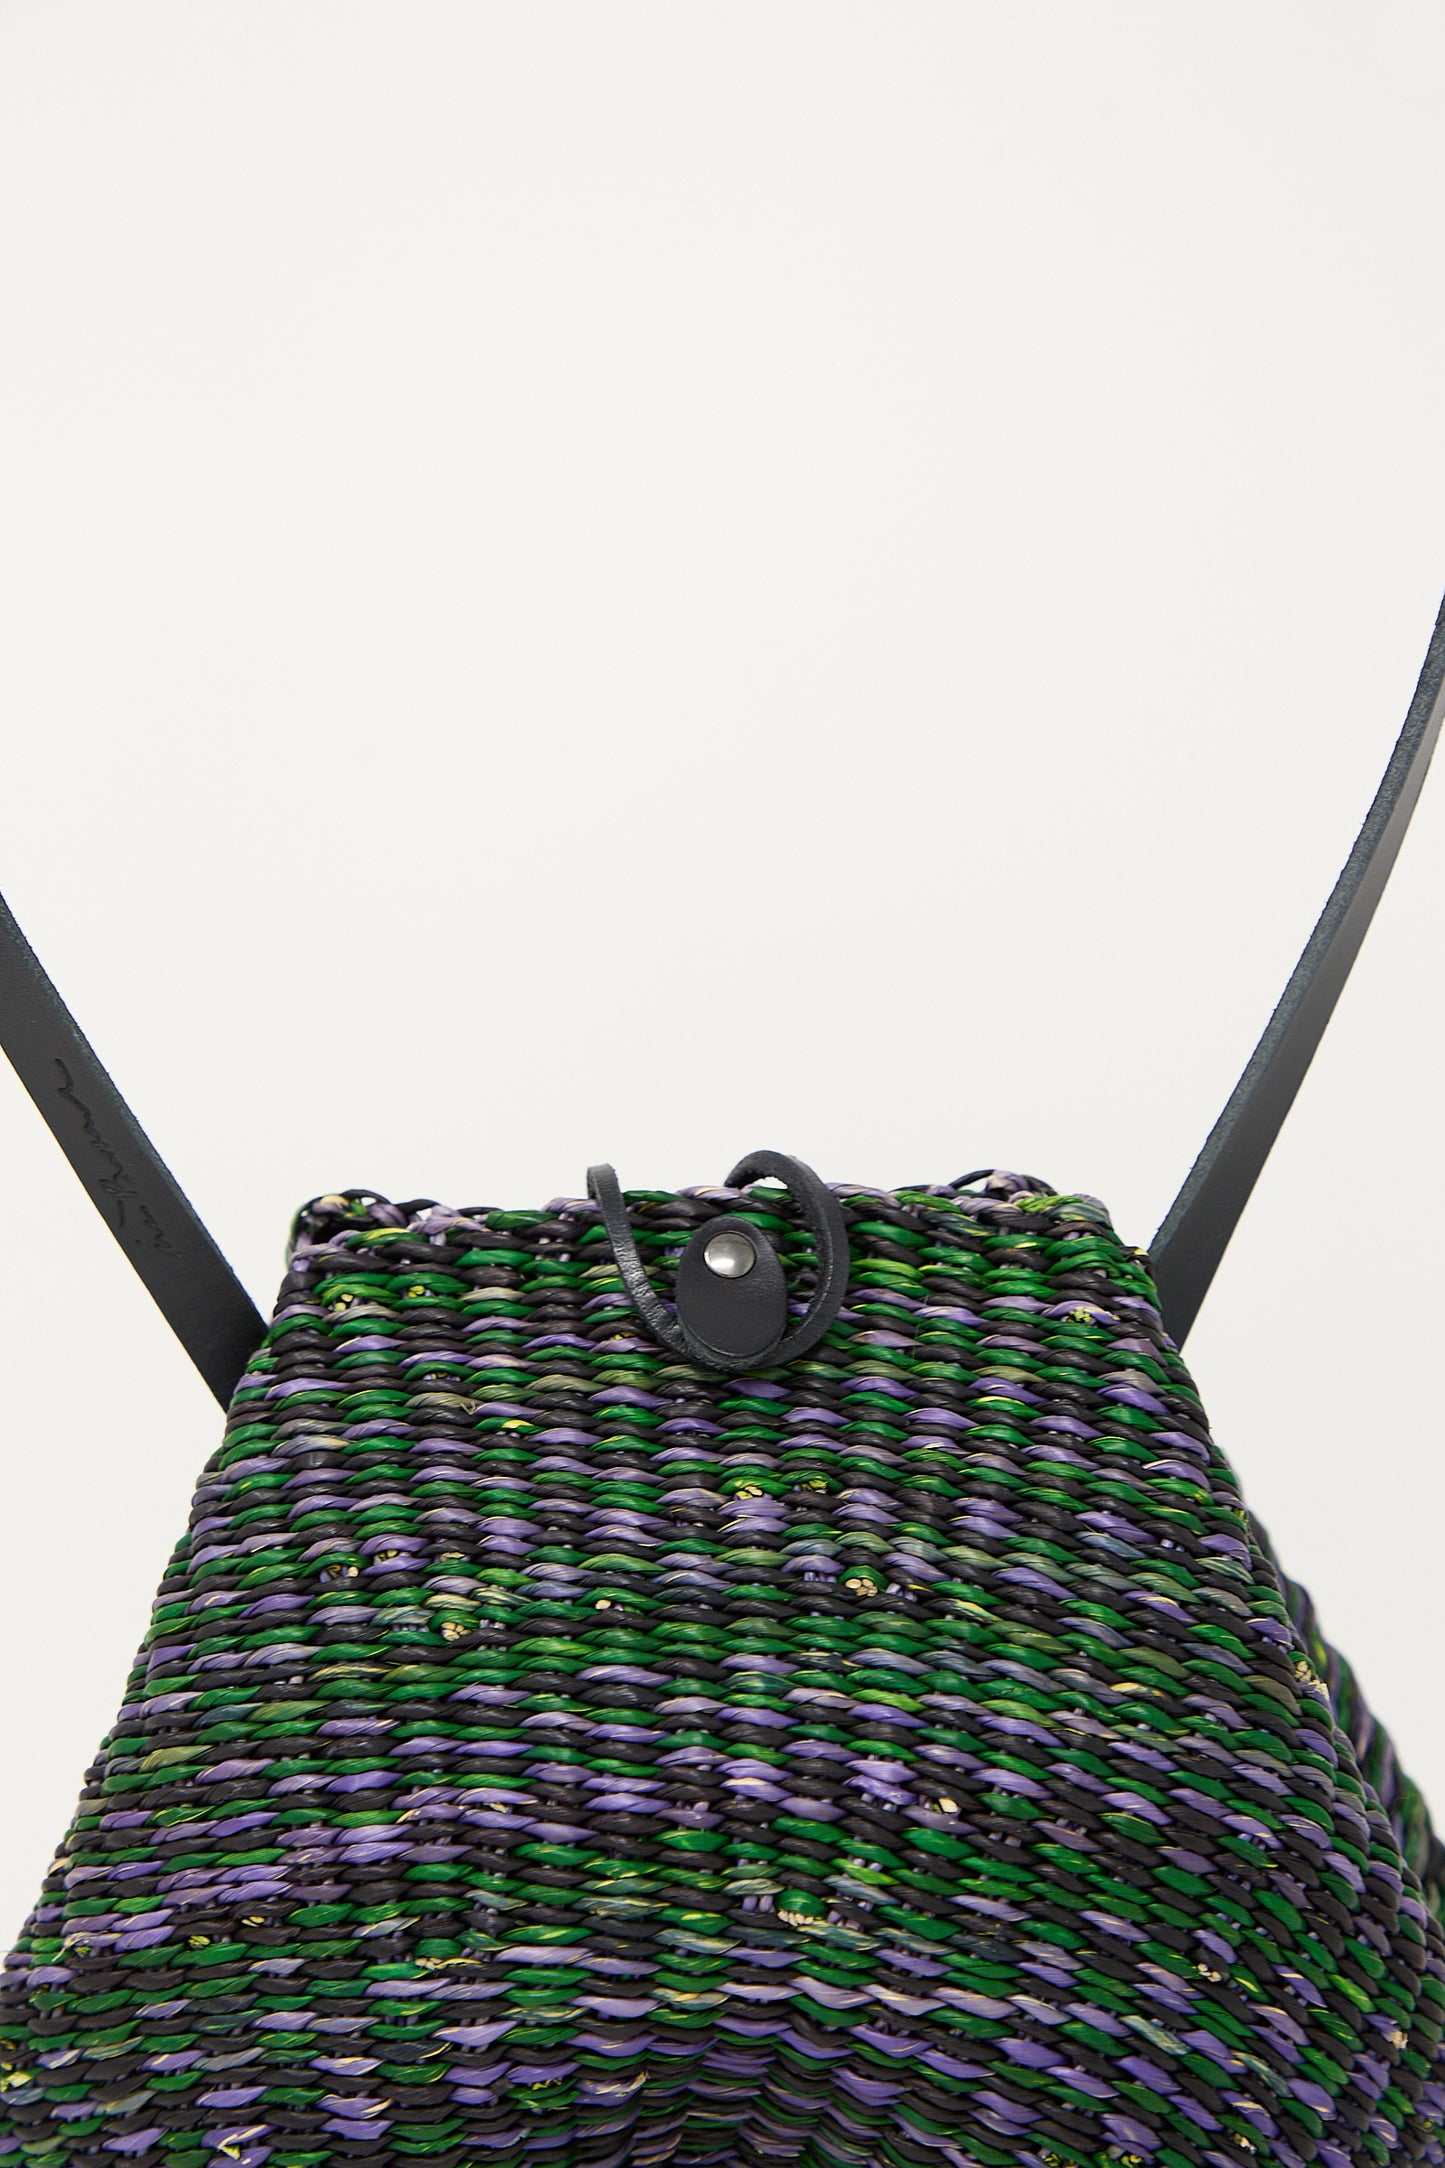 Close-up of a textured, multicolored Inès Bressand N. 14 Mini Shell Bag in Green shoulder bag with black straps against a white background.